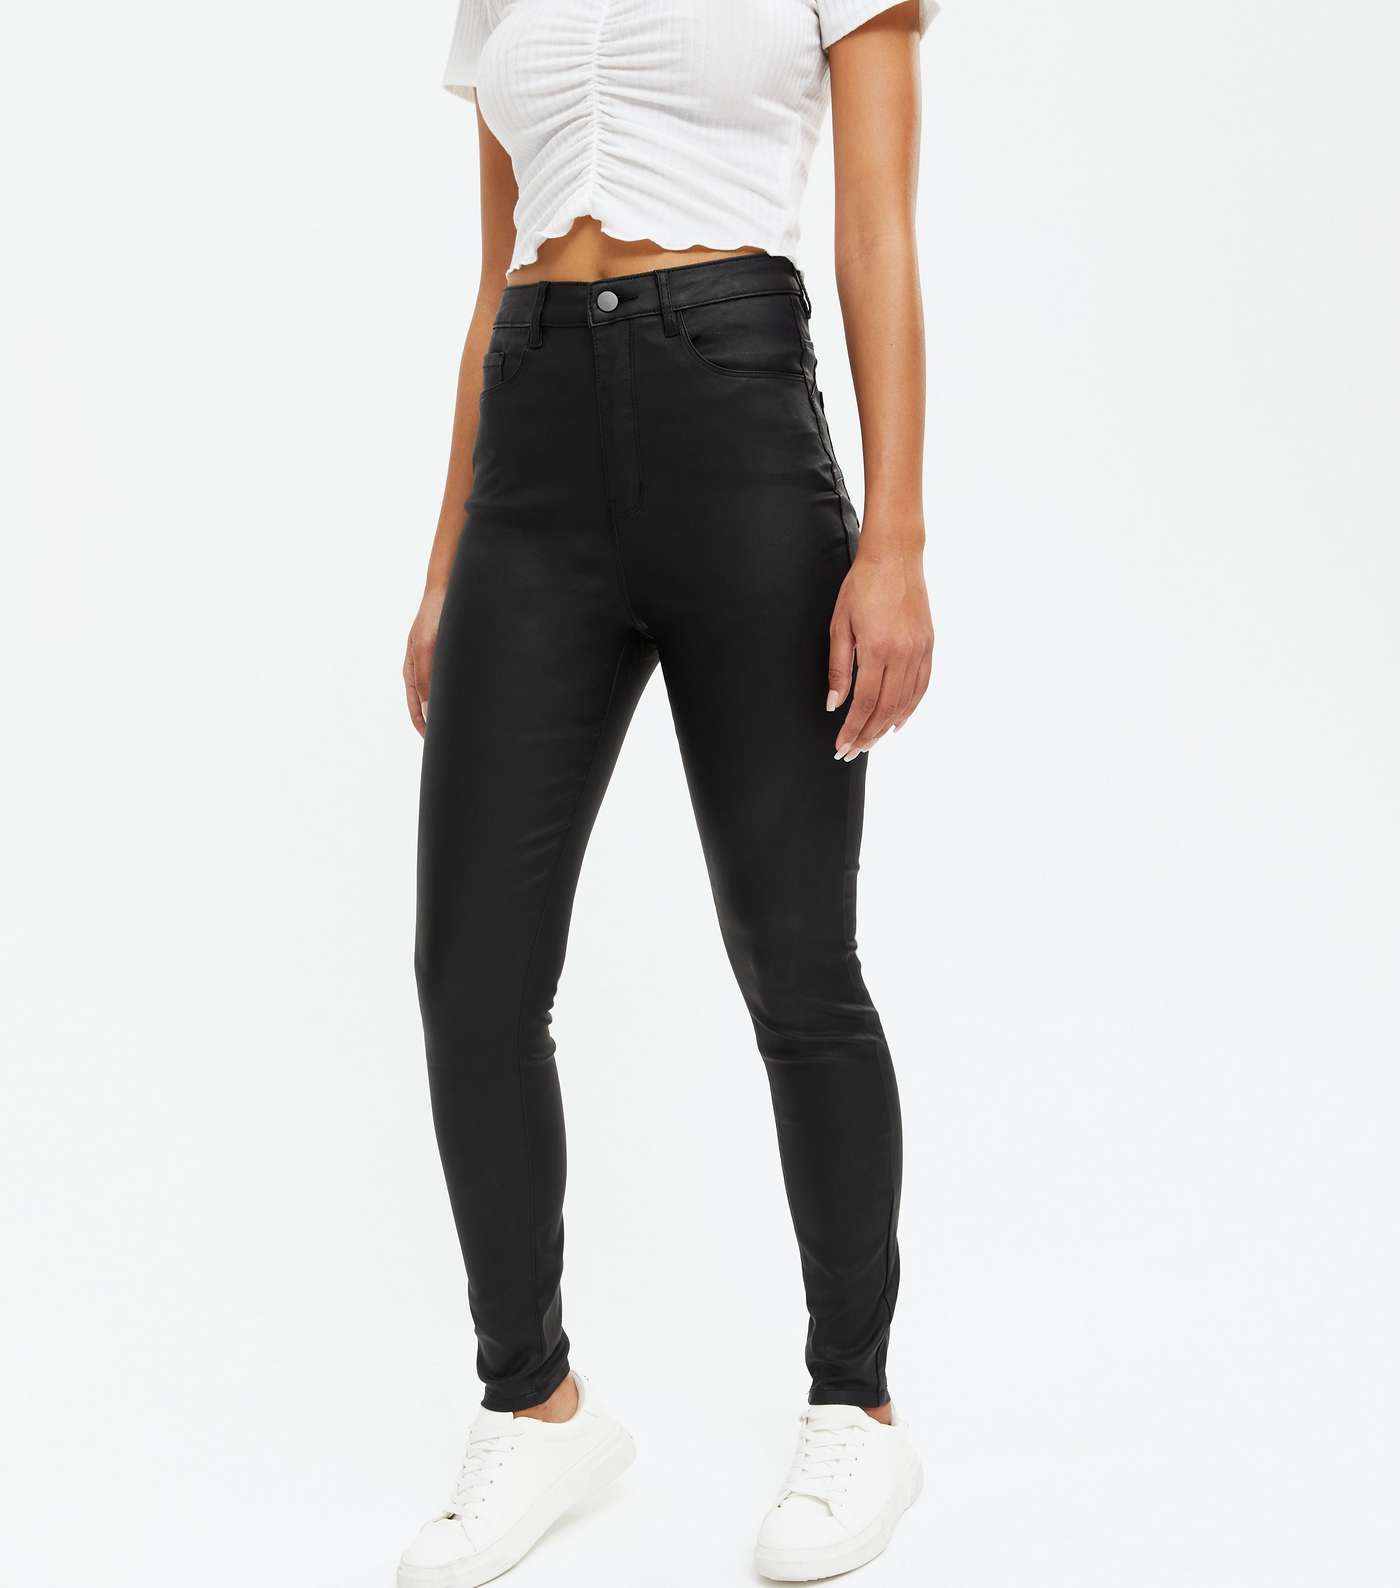 Urban Bliss Black Leather-Look Shaper Jeans Image 2